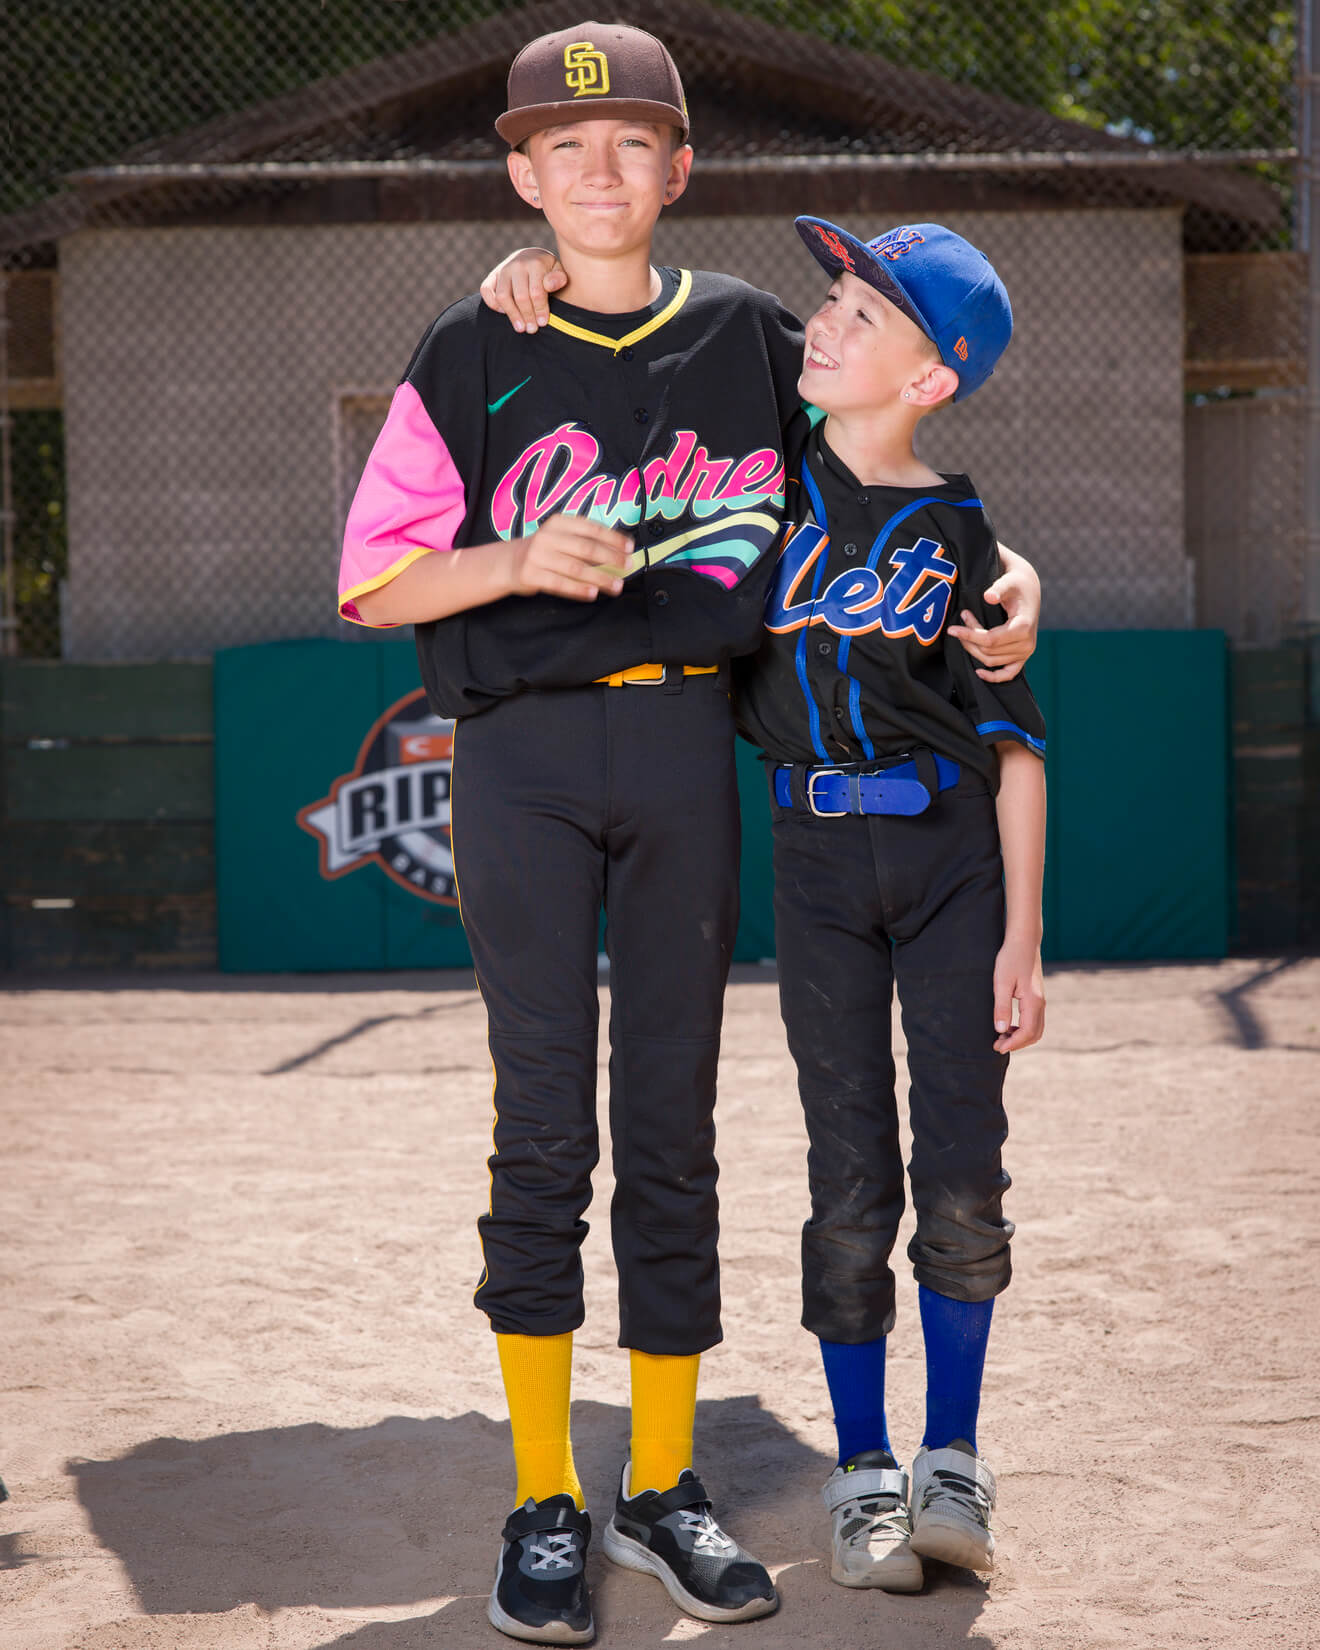 Buddy photos, team and individual photos for sports teams. Fast, easy, and professional pictures for teams and leagues